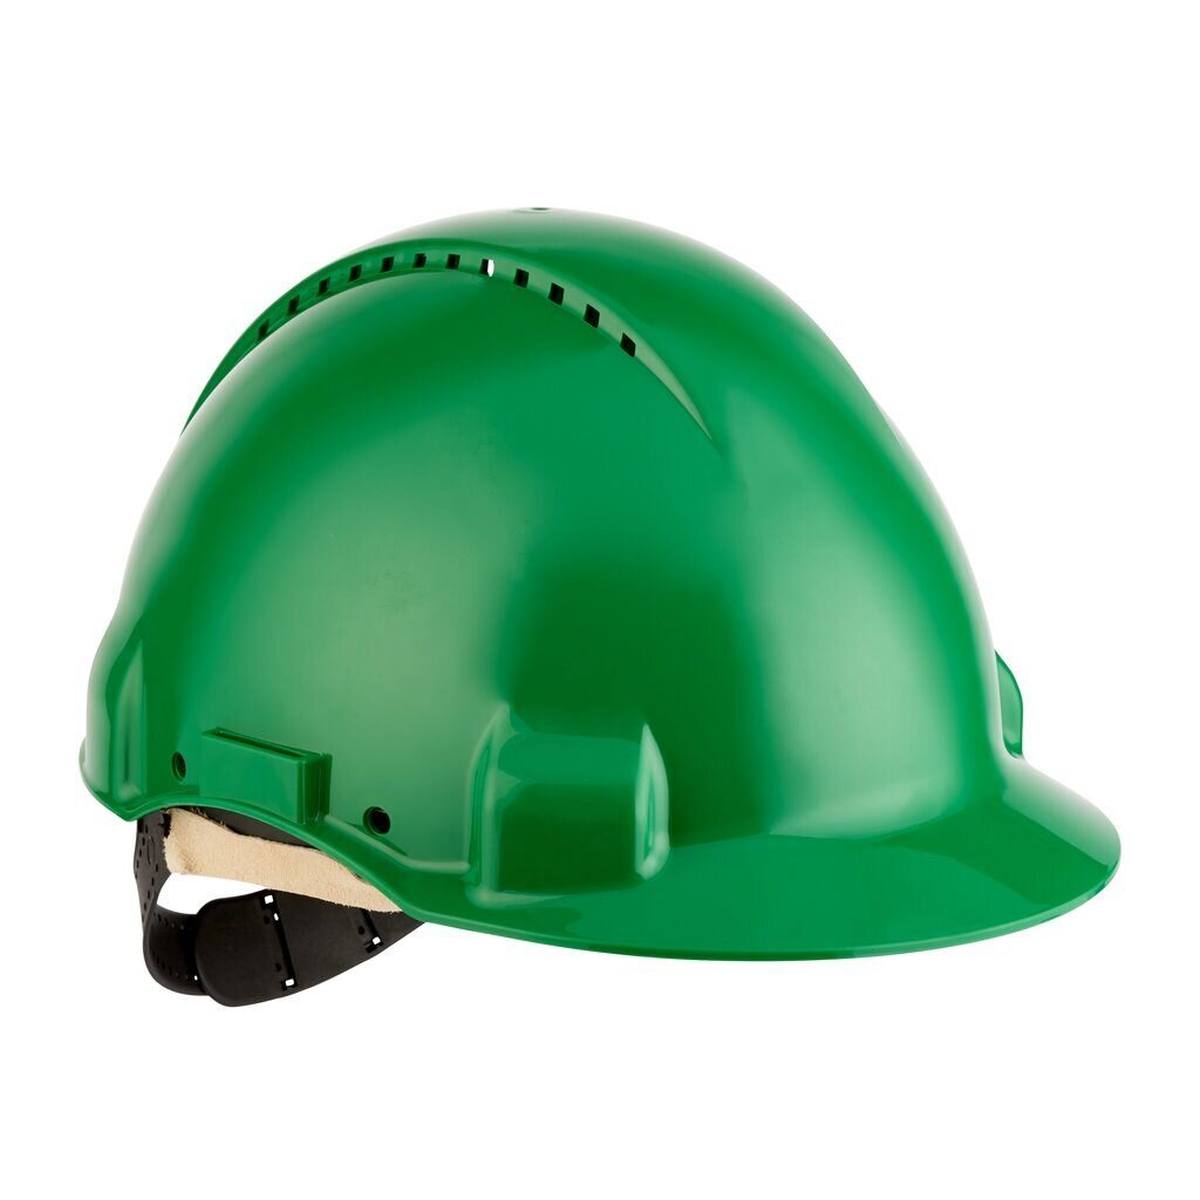 3M G3000 safety helmet G30DUG in green, ventilated, with uvicator, pinlock and leather sweatband